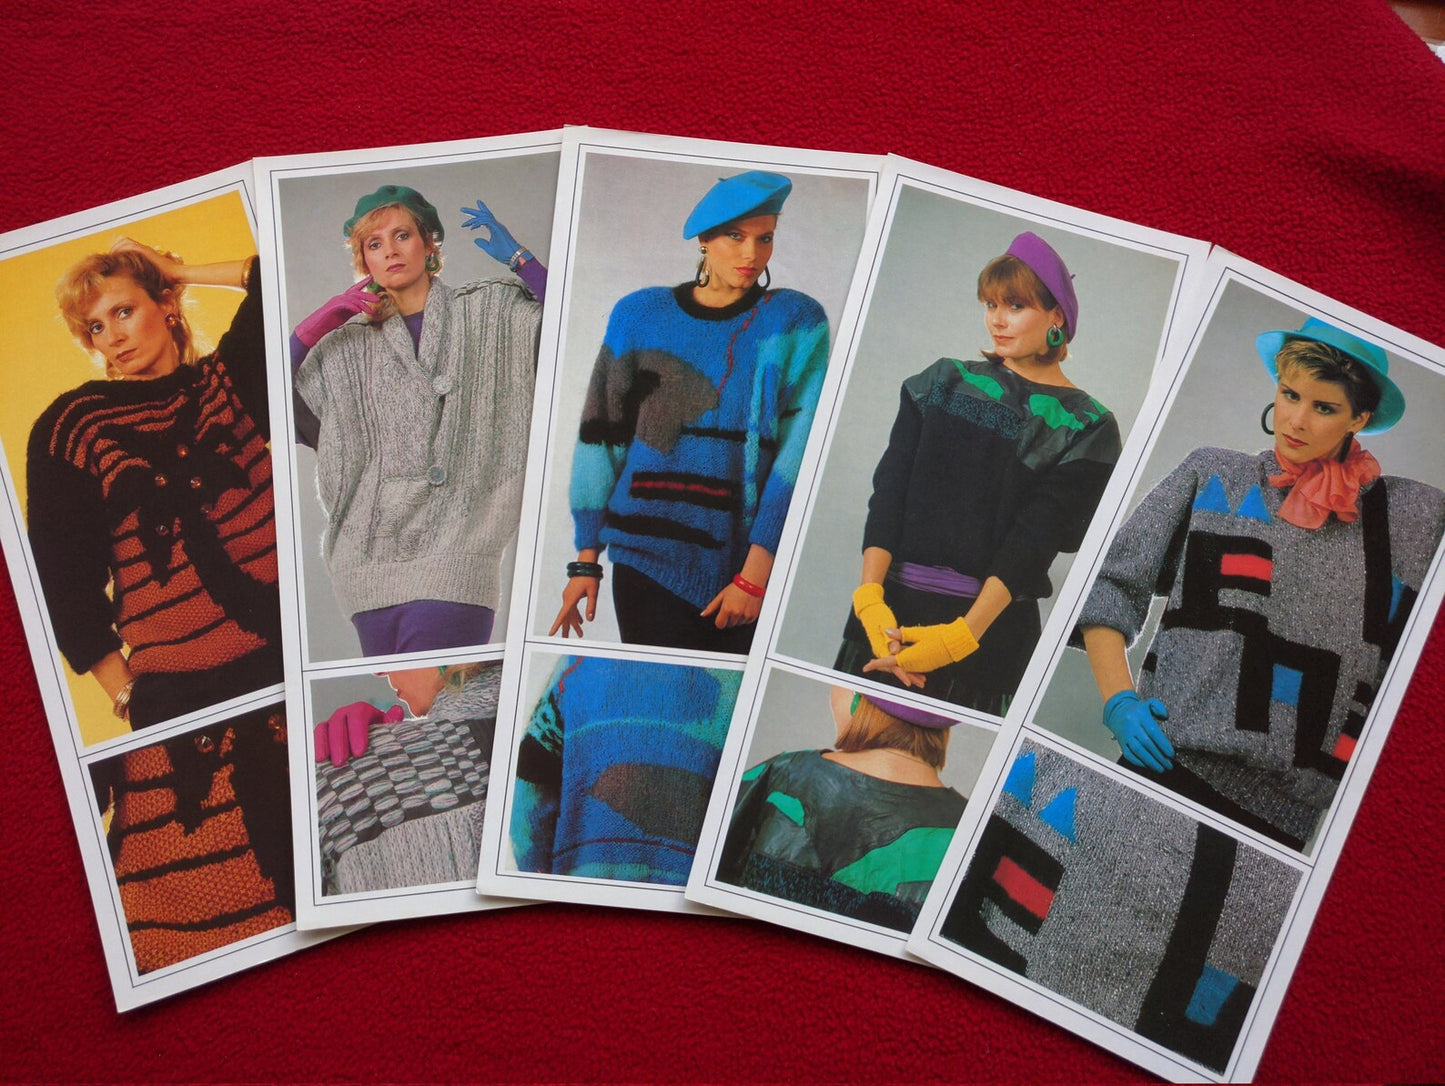 Vintage set of 24 Czechoslovakia Fashion Postcards With Knitting Patterns from 1980s - 24 knitting patterns and ideas - Tutorial book included.